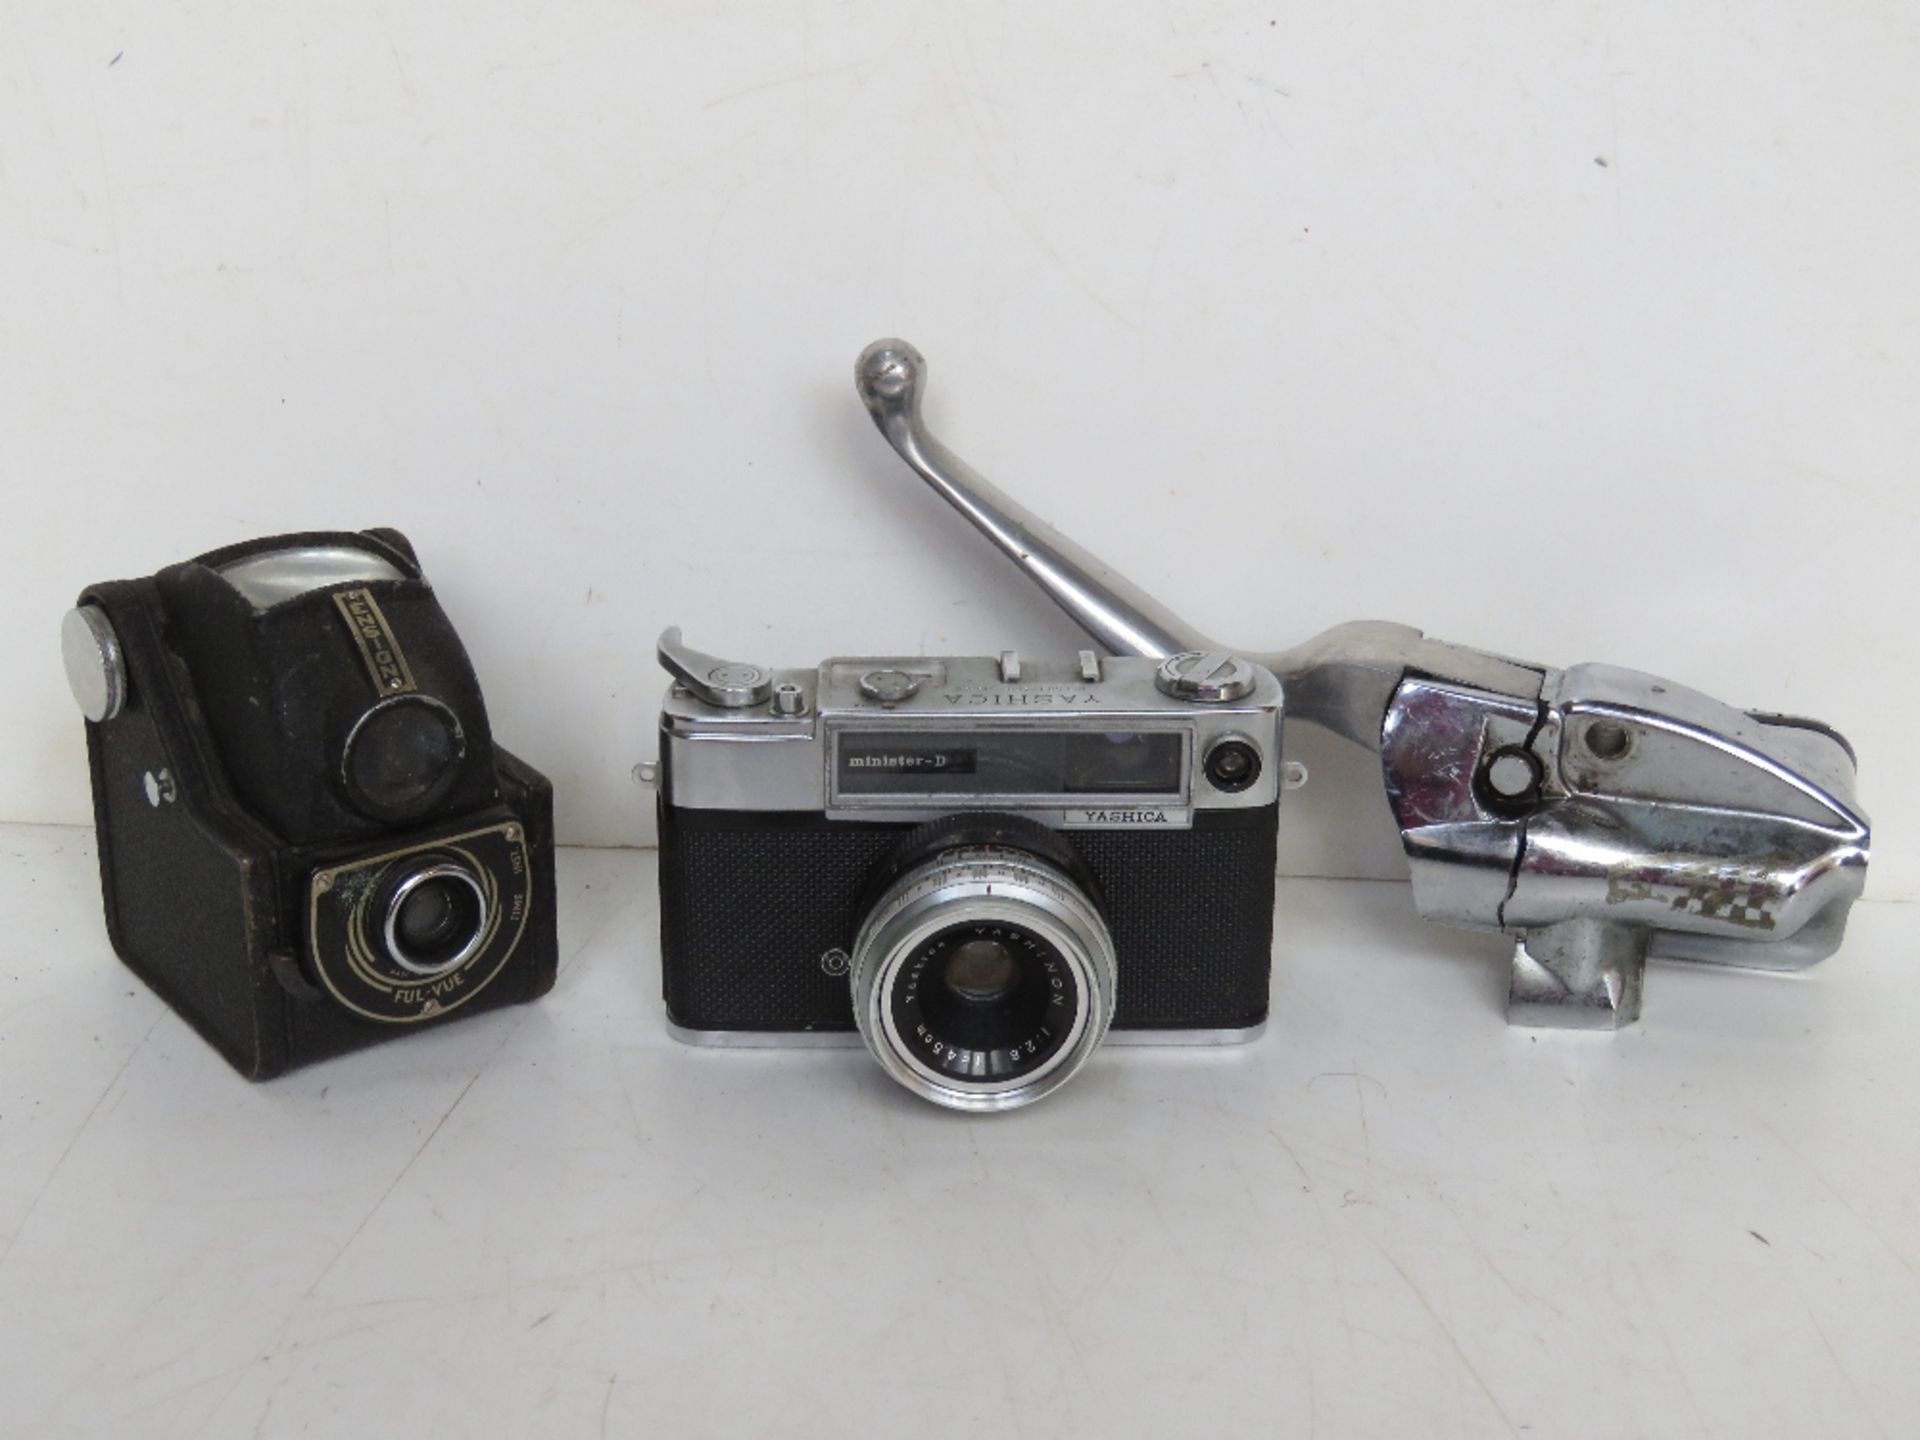 A Yashica MD5042450 camera together with two other items.